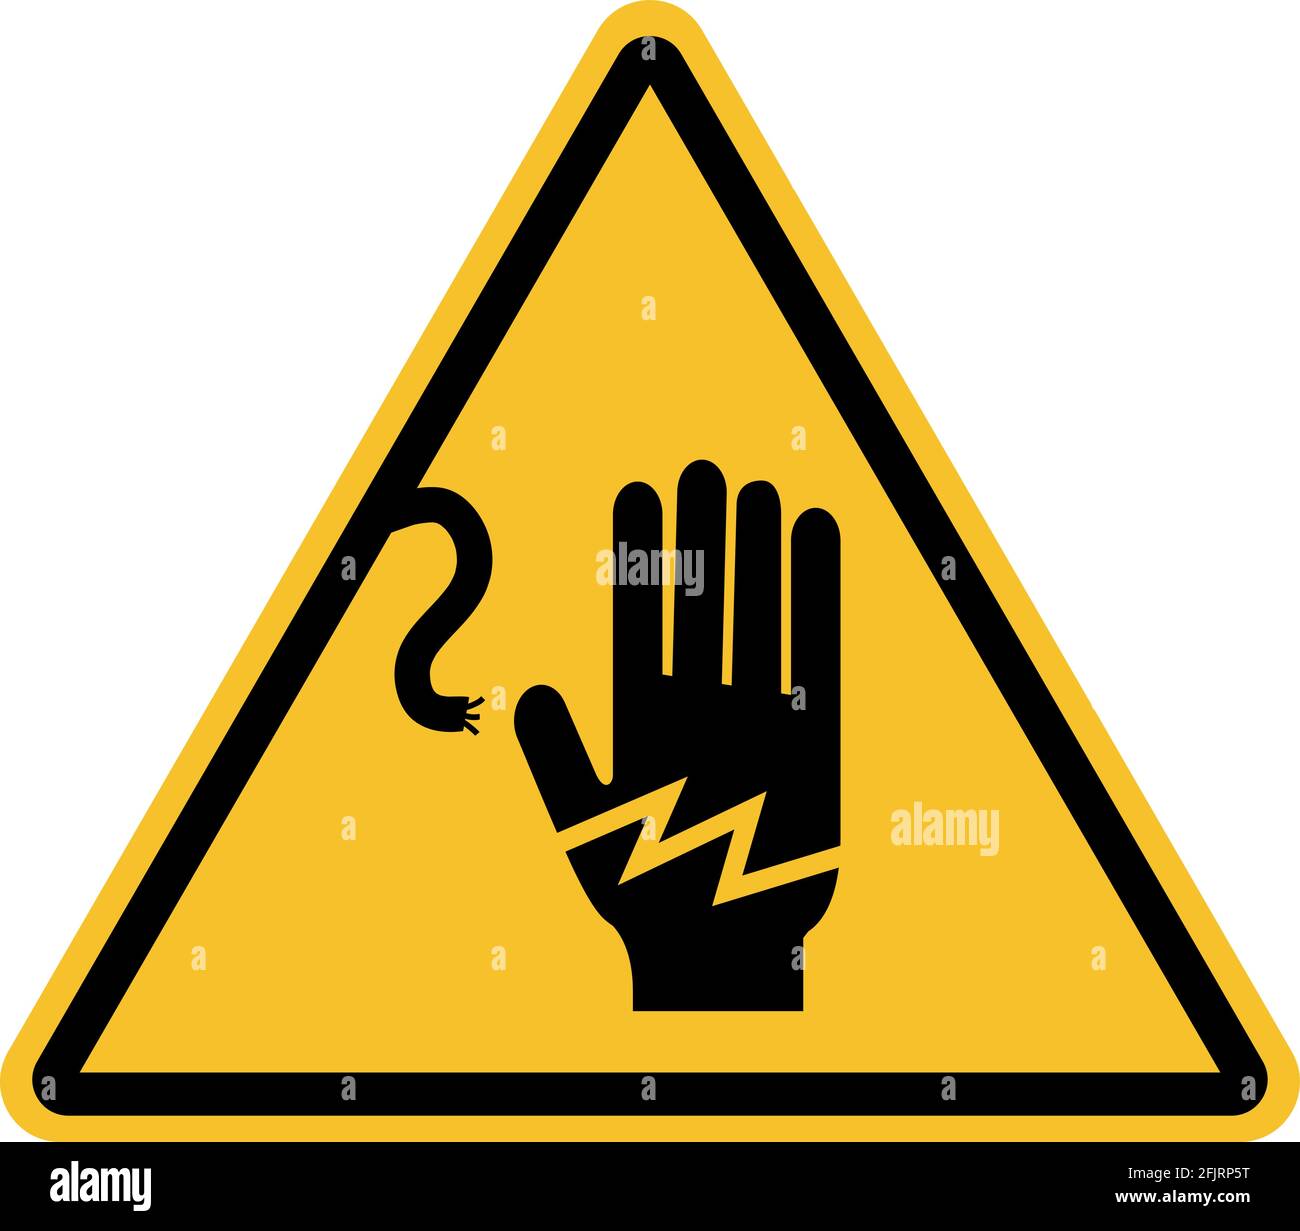 Electrical Shock Warning sign. Safety symbols and signs. Stock Vector